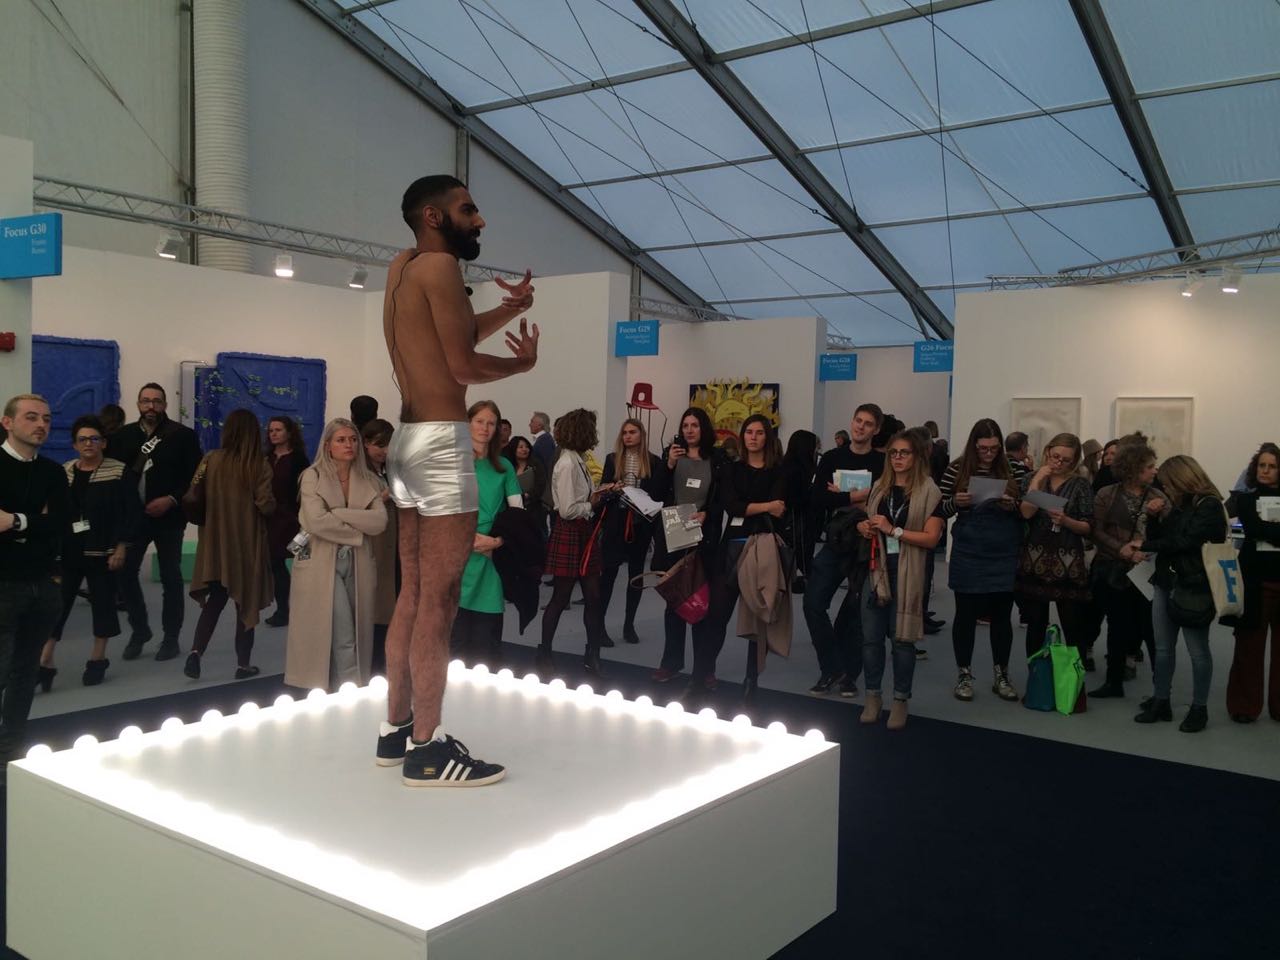  Mahmoud Khaled, Untitled (Go-go Dancing Platform) Speaks, 2016, white plinth with light bulbs, voice amplifiers, headphones and performer, 10 mins. Shown in Frieze Live, London. 